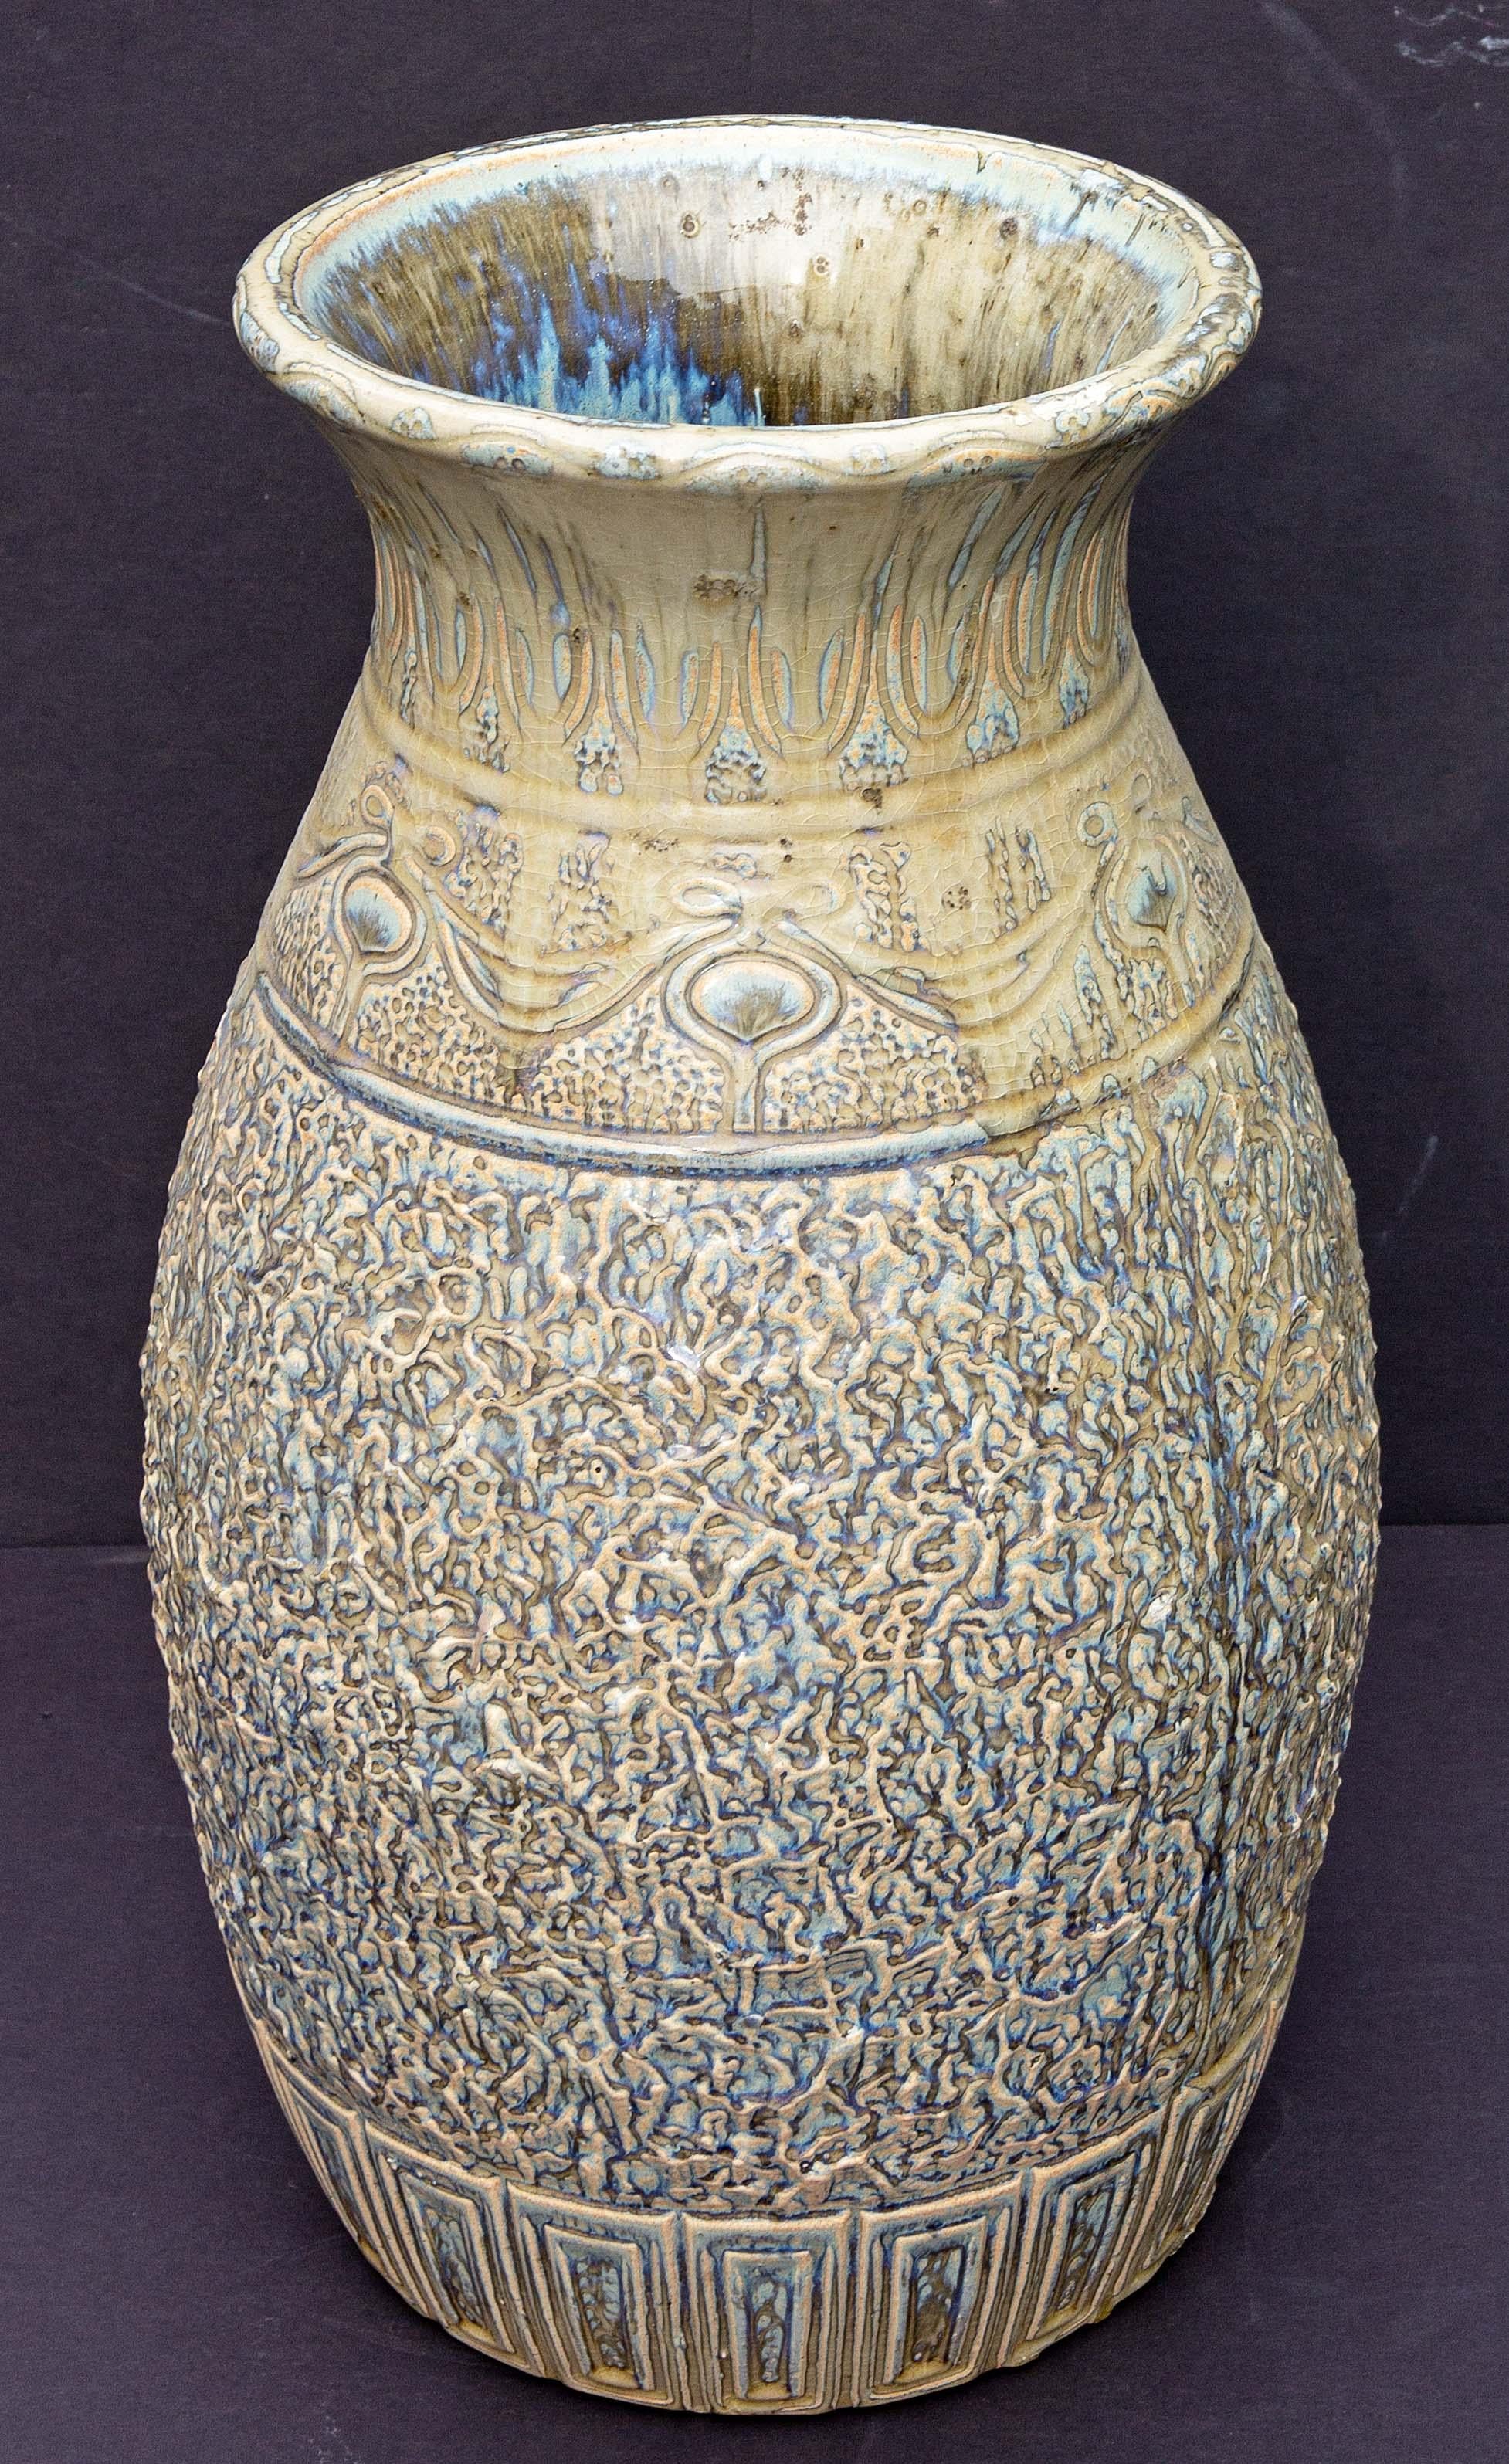 Art Nouveau Large Arts and Crafts Pottery Floor Vase Heavy Drip Glaze Early 20th Century For Sale